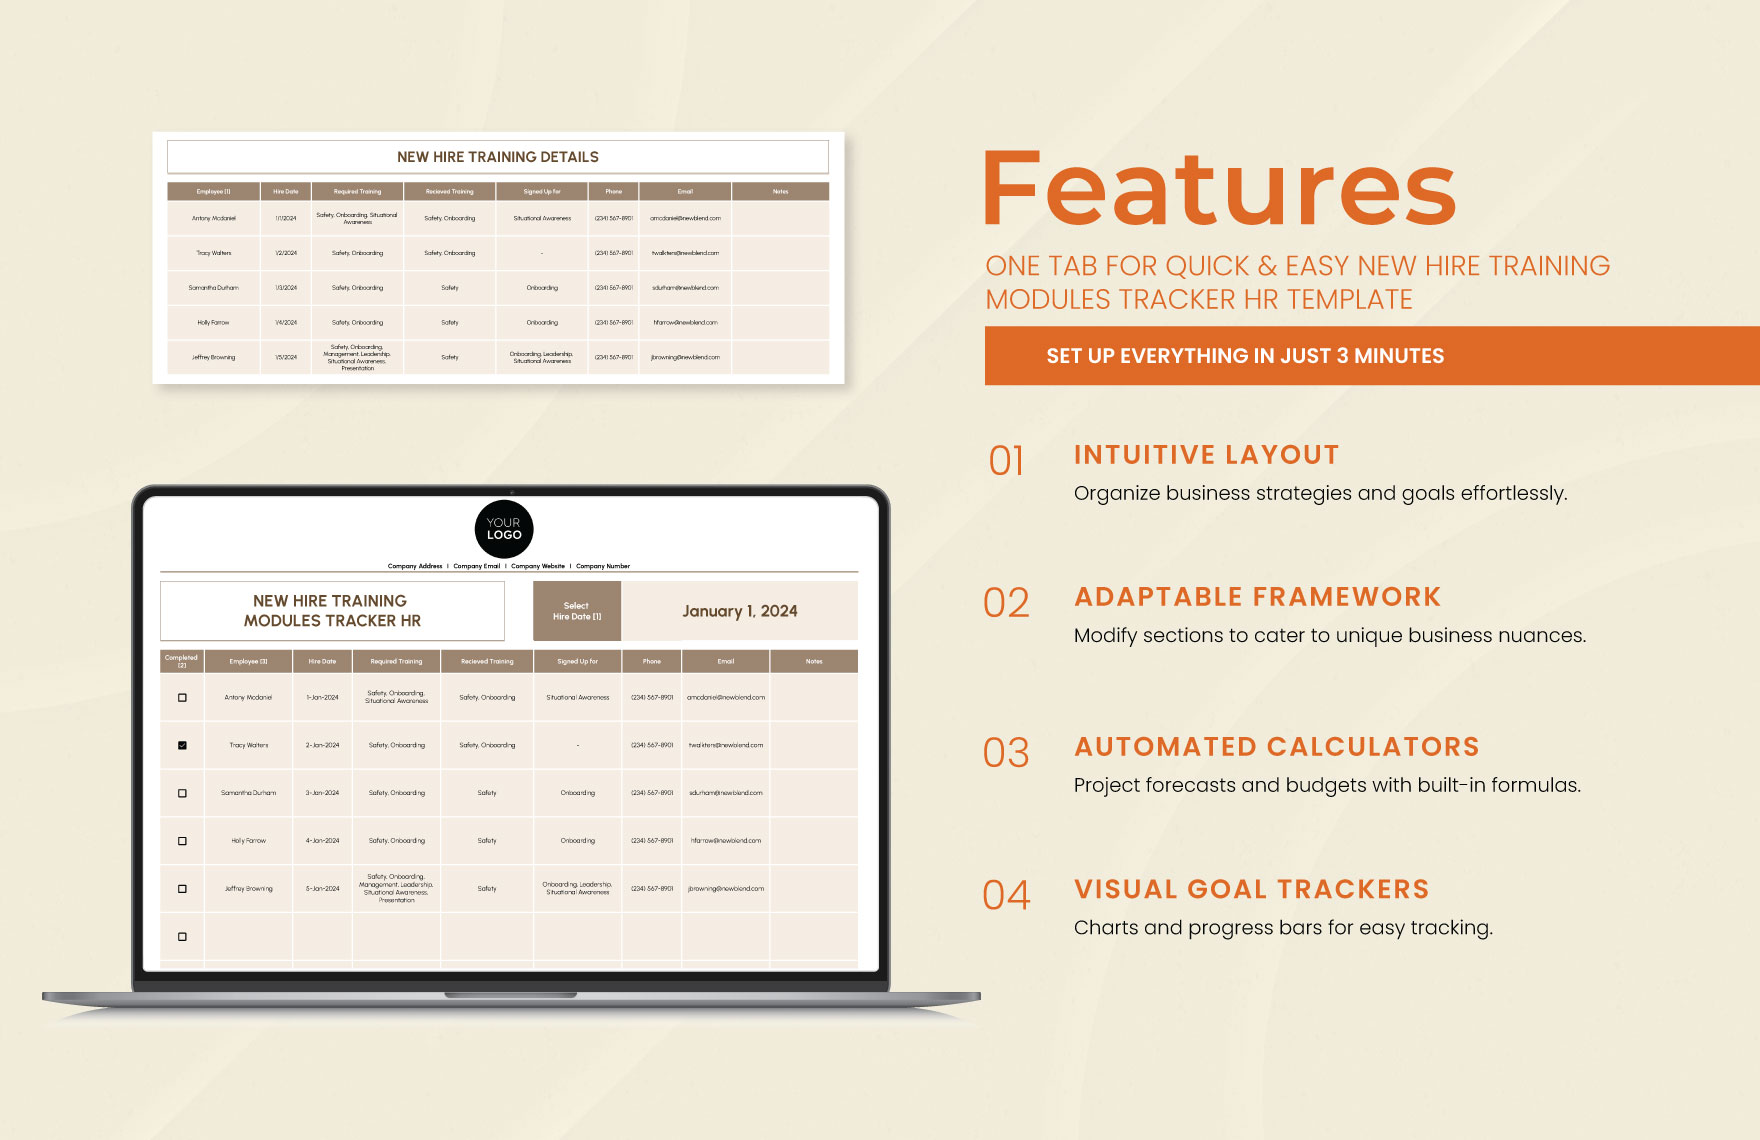 New Hire Training Modules Tracker HR Template